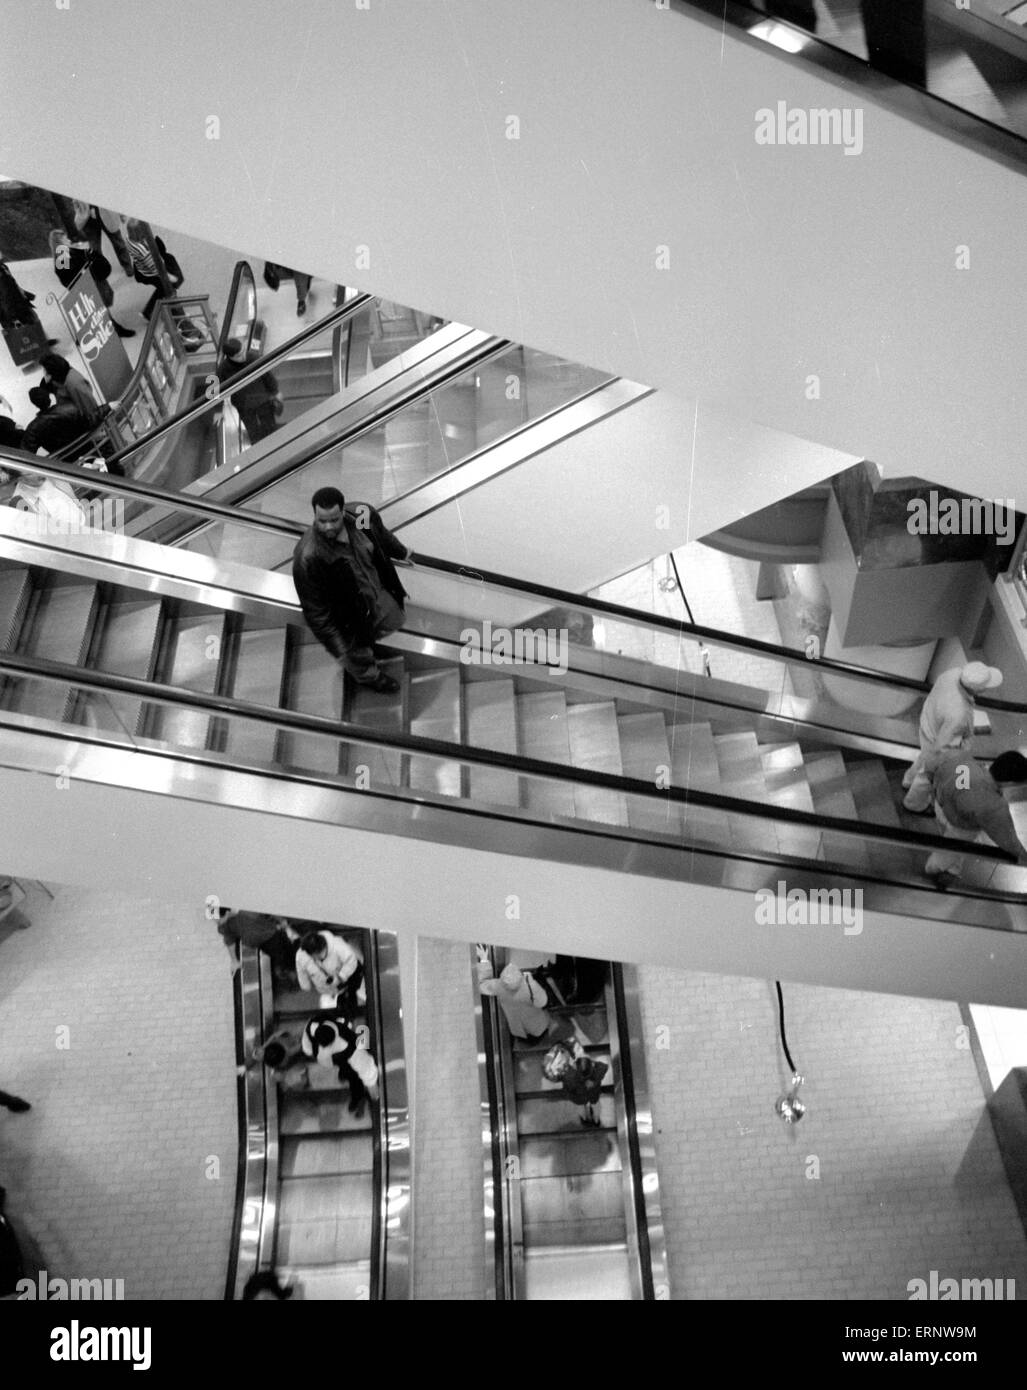 Chicago, IL, 14-Dec-1996: A lonely man on an escalator at Marshall Field's department store on Michigan Ave. Stock Photo